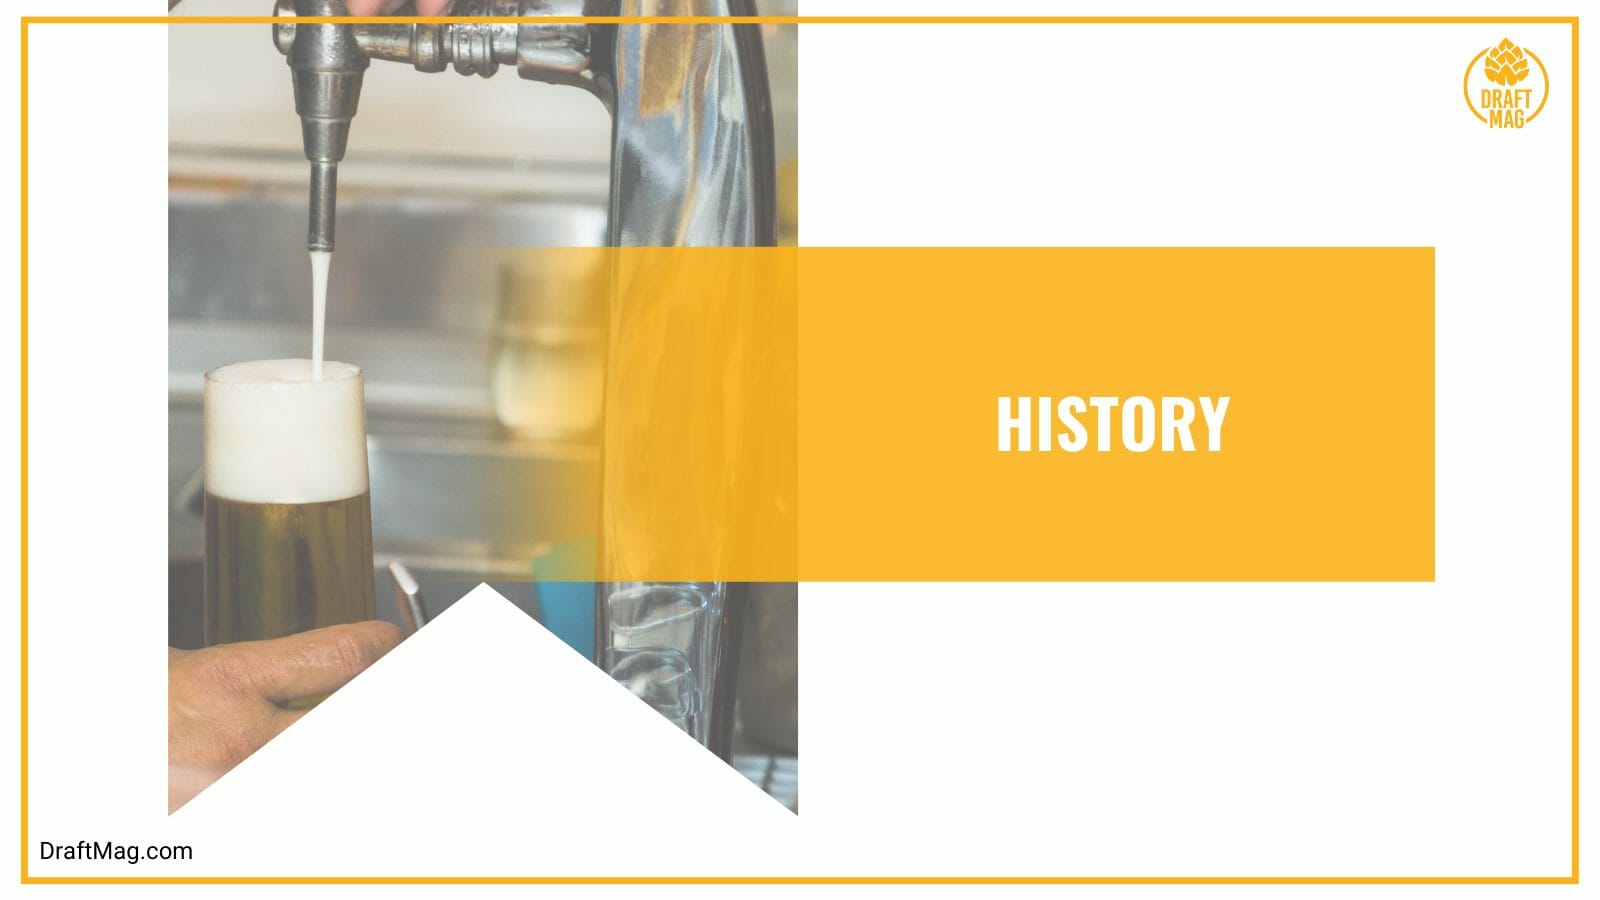 European pale lager history